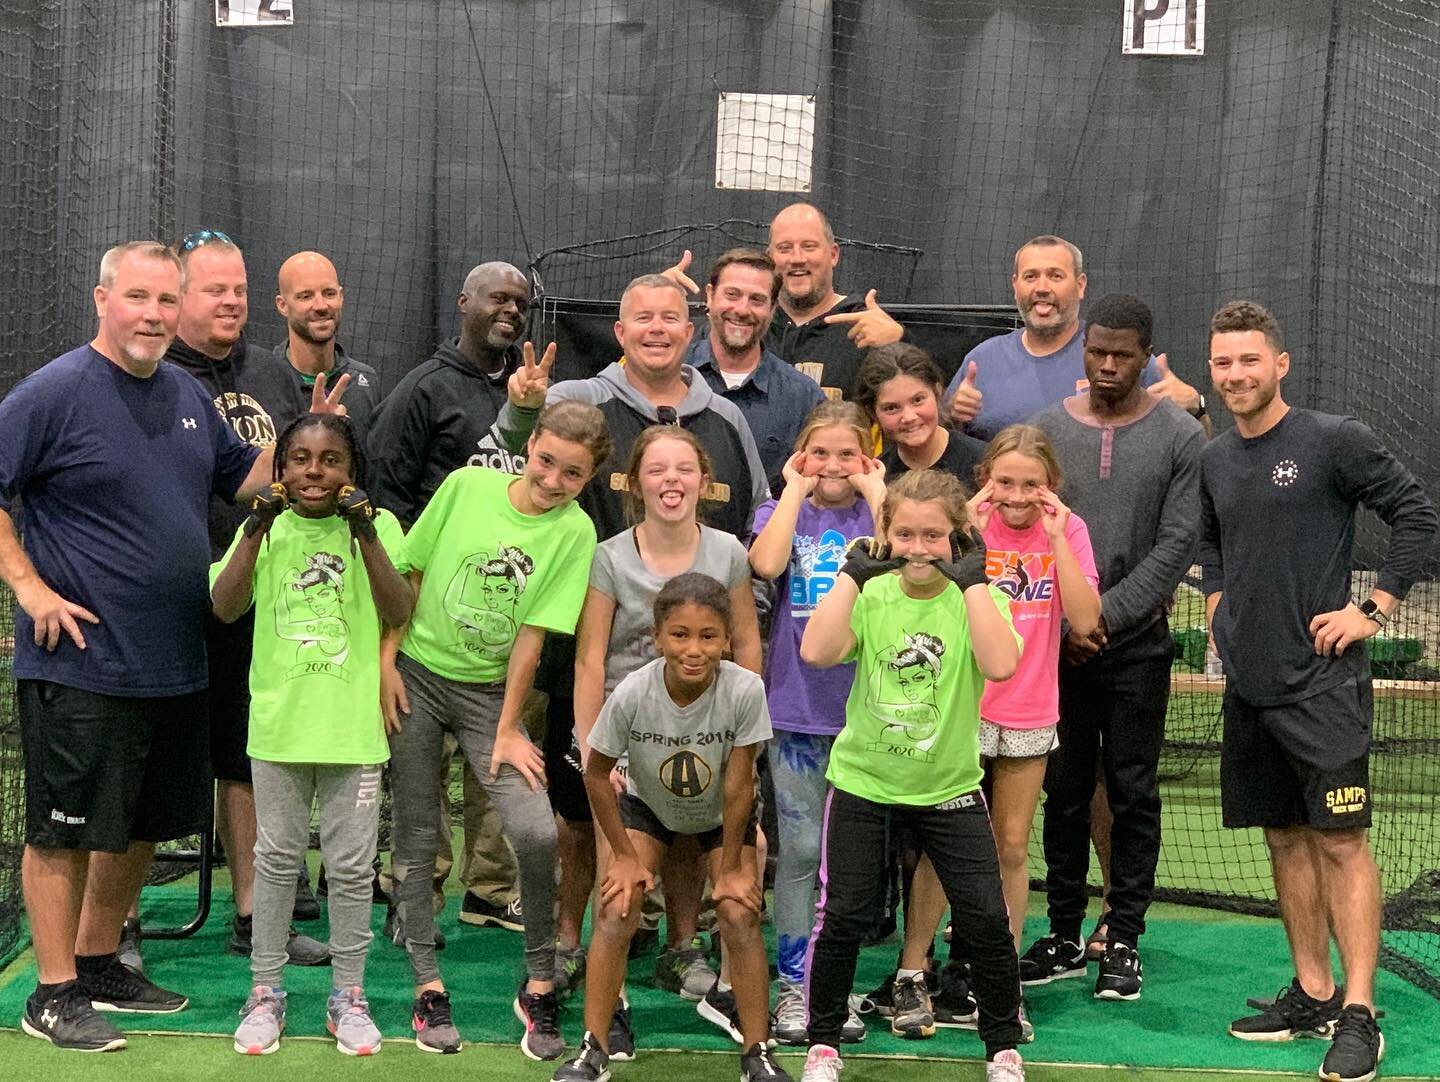 Coach Barnhart (Father of 2x Gold Glove winning catcher, Tucker Barnhart 🏆🏆) does outstanding work with our baseball and softball #shackletes! Coach Barnhart offers baseball/softball hitting, catching, and defensive training &amp; lessons year roun